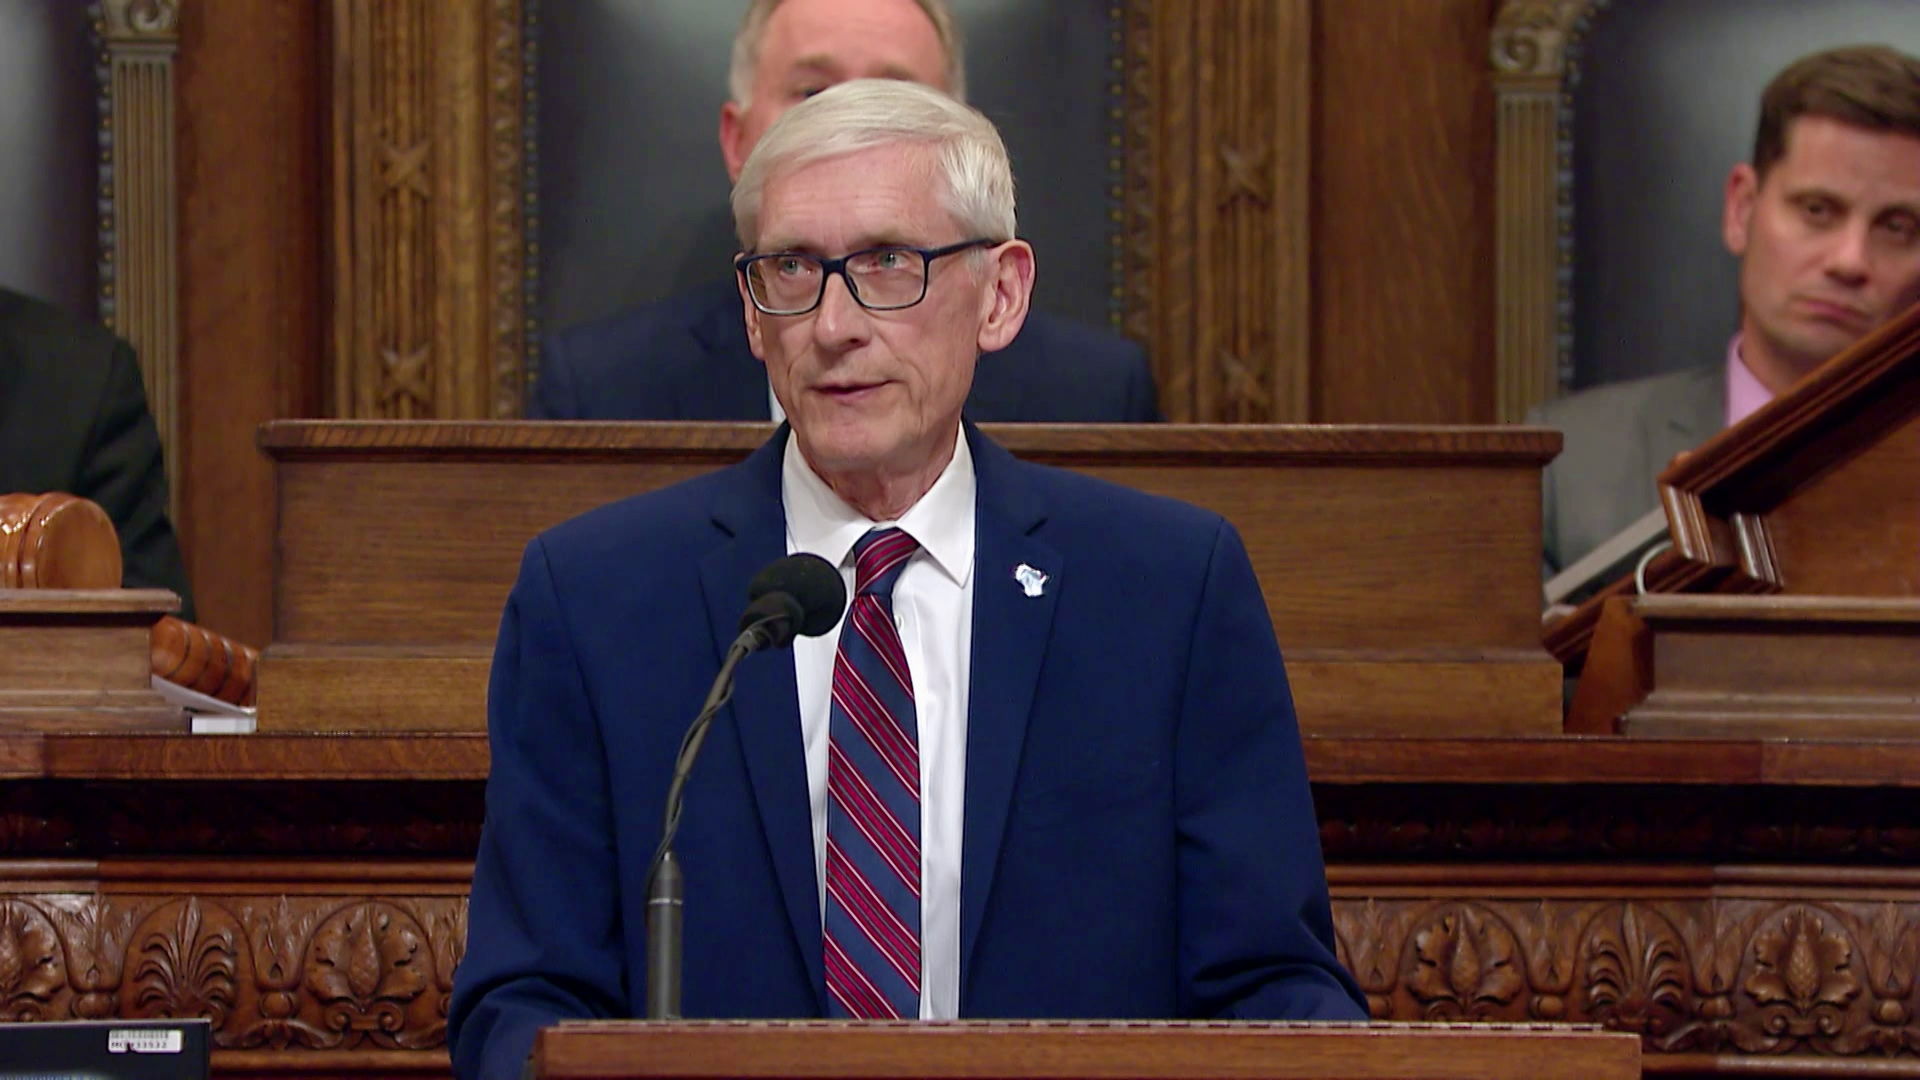 Tony Evers stands at a podium and speaks into a microphone, with other people seated behind him in high-backed leather chairs at a wood dais with ornamental carvings.